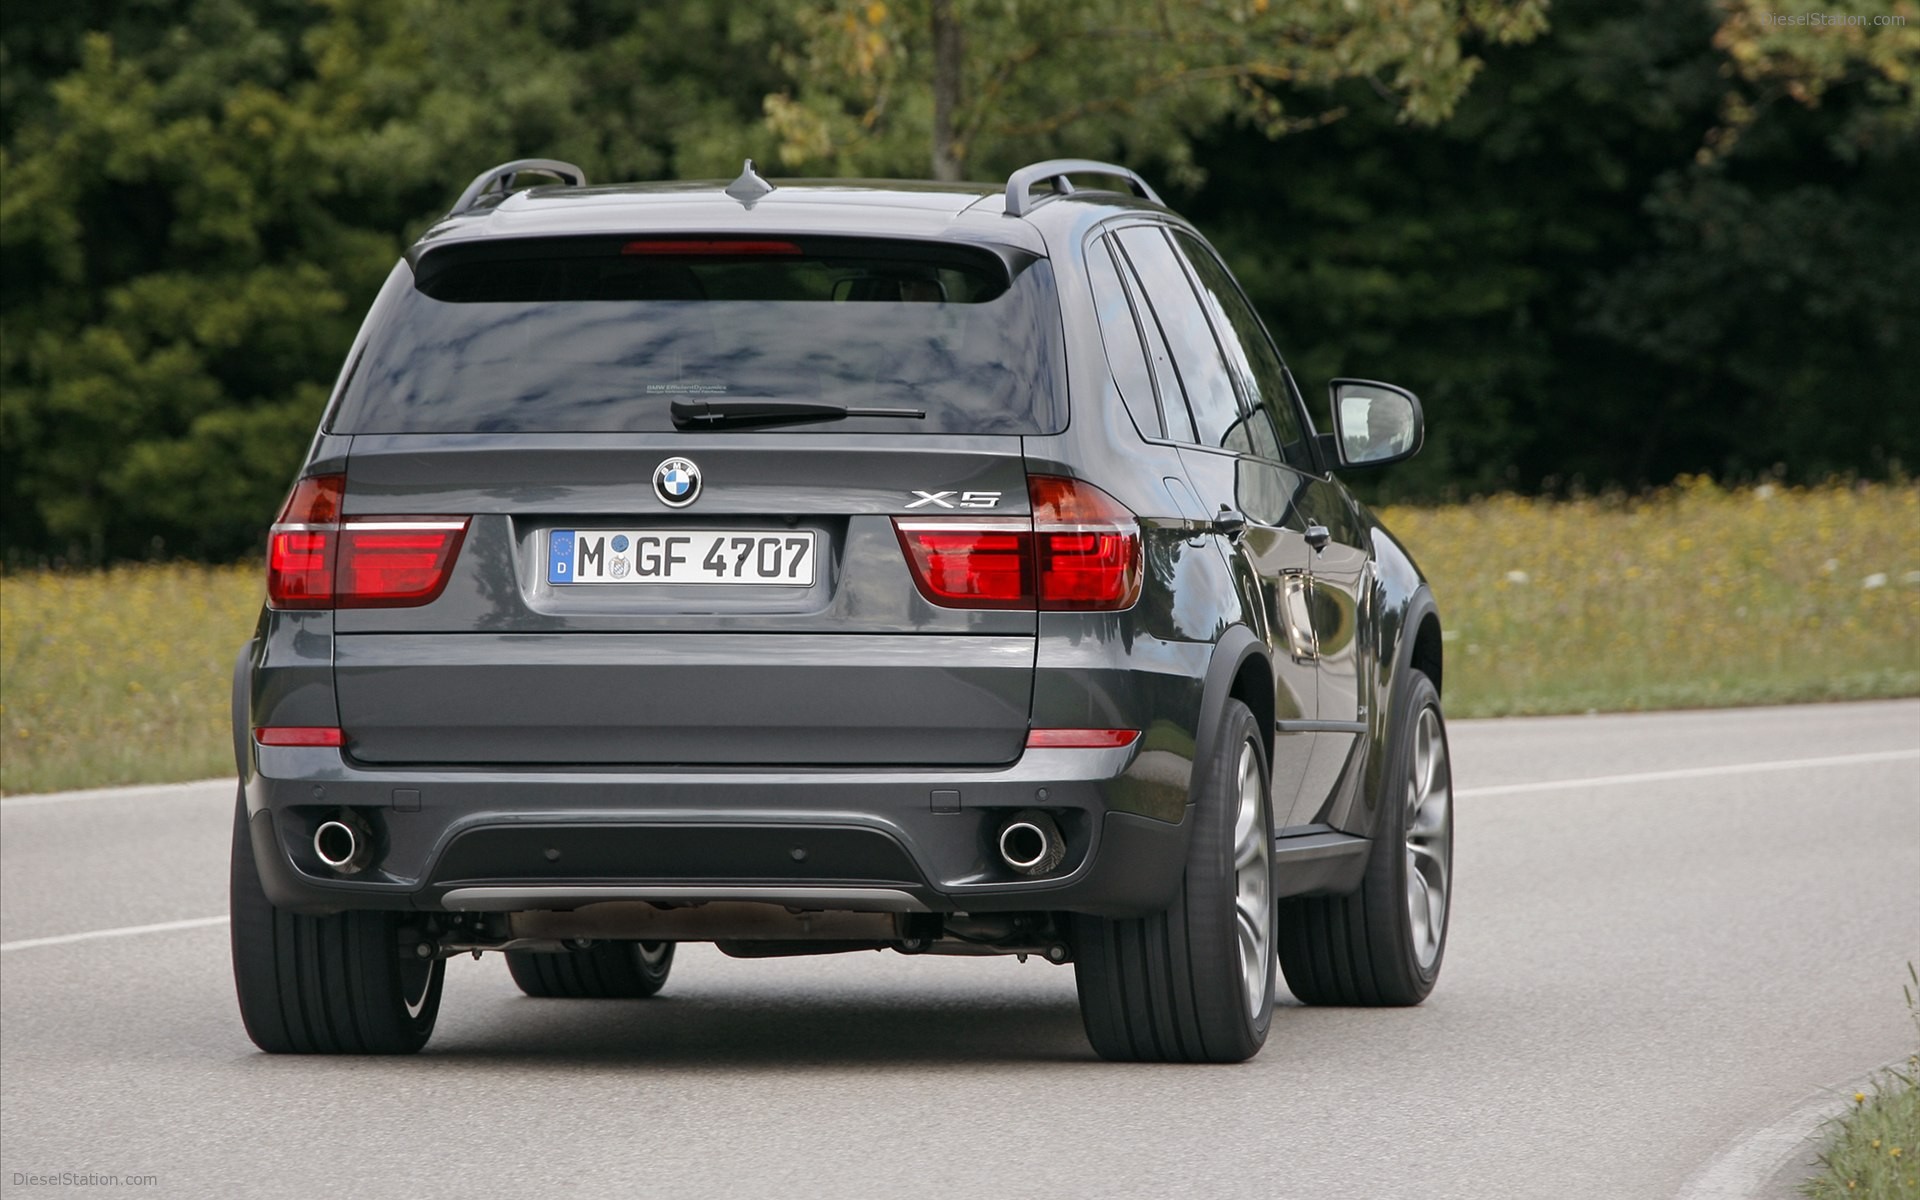 BMW X5 2012 - Car Picture at Dieselstation